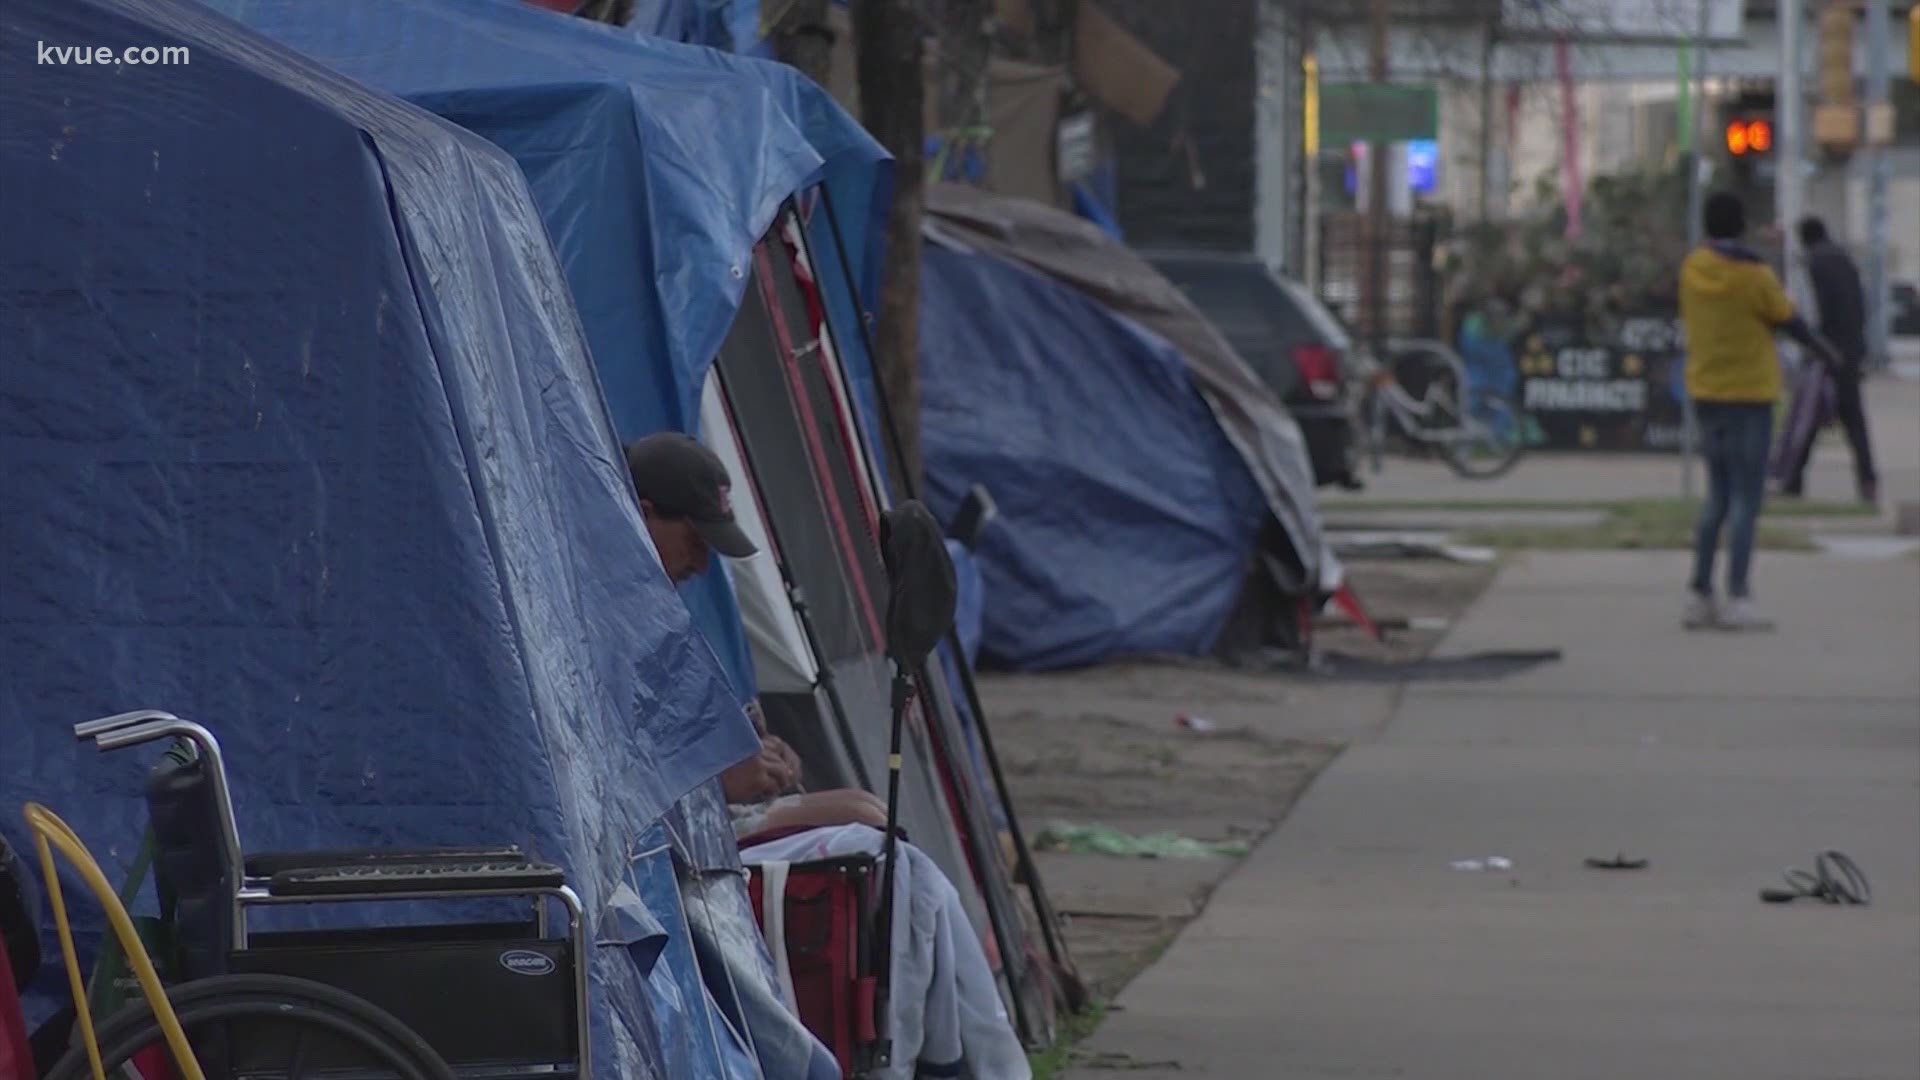 Homelessness continues to be a hot topic of conversation. City council approved five different items-aimed to help house and provide shelter to people experiencing.